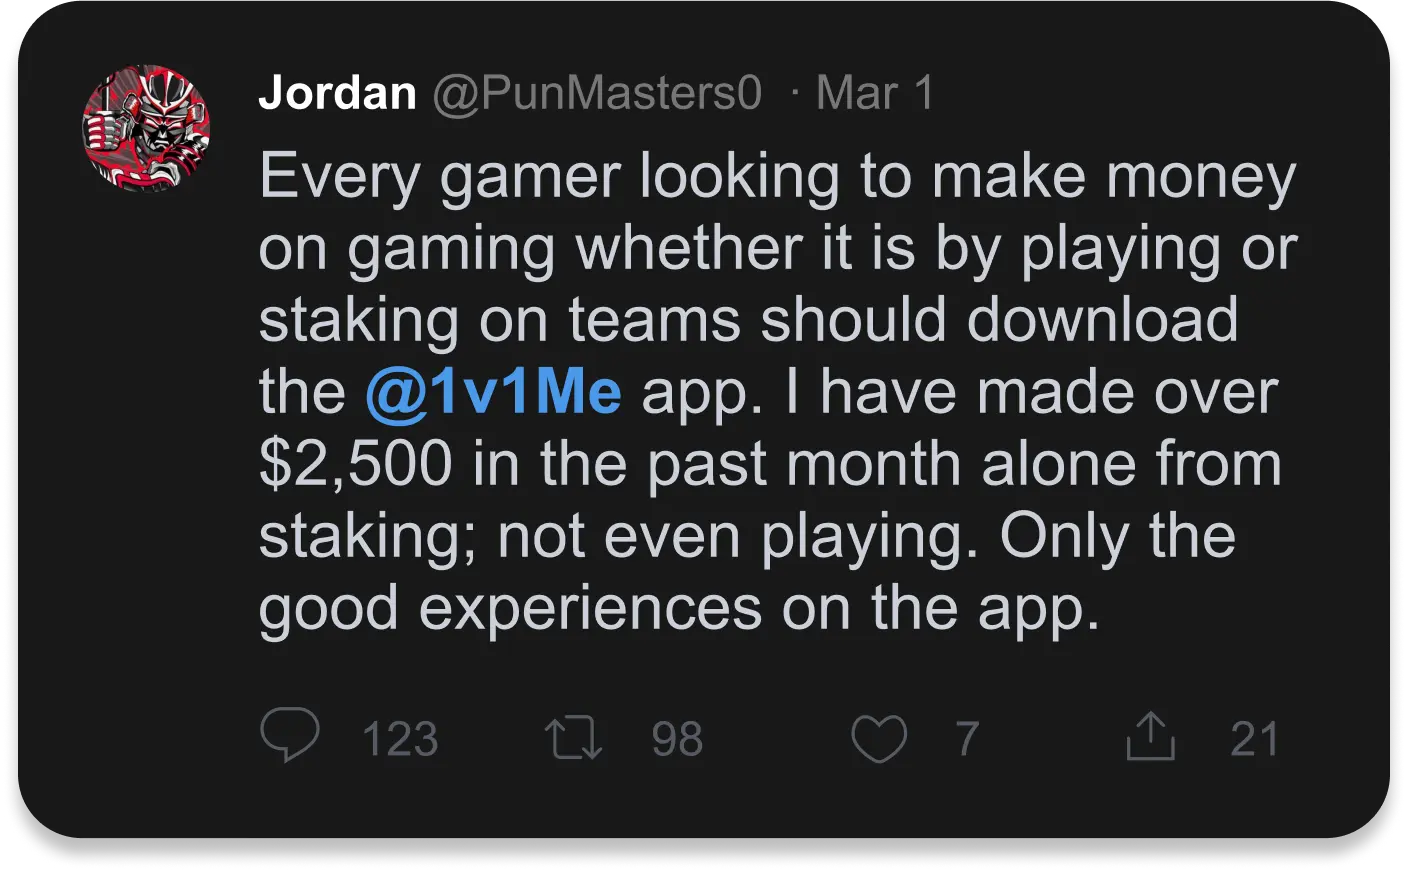 Every gamer looking to make money on gaming whether it is by playing or staking on teams should download the @1v1Me app. I have made over $2,500 in the past month alone from staking; not even playing. Only the good experiences on the app.